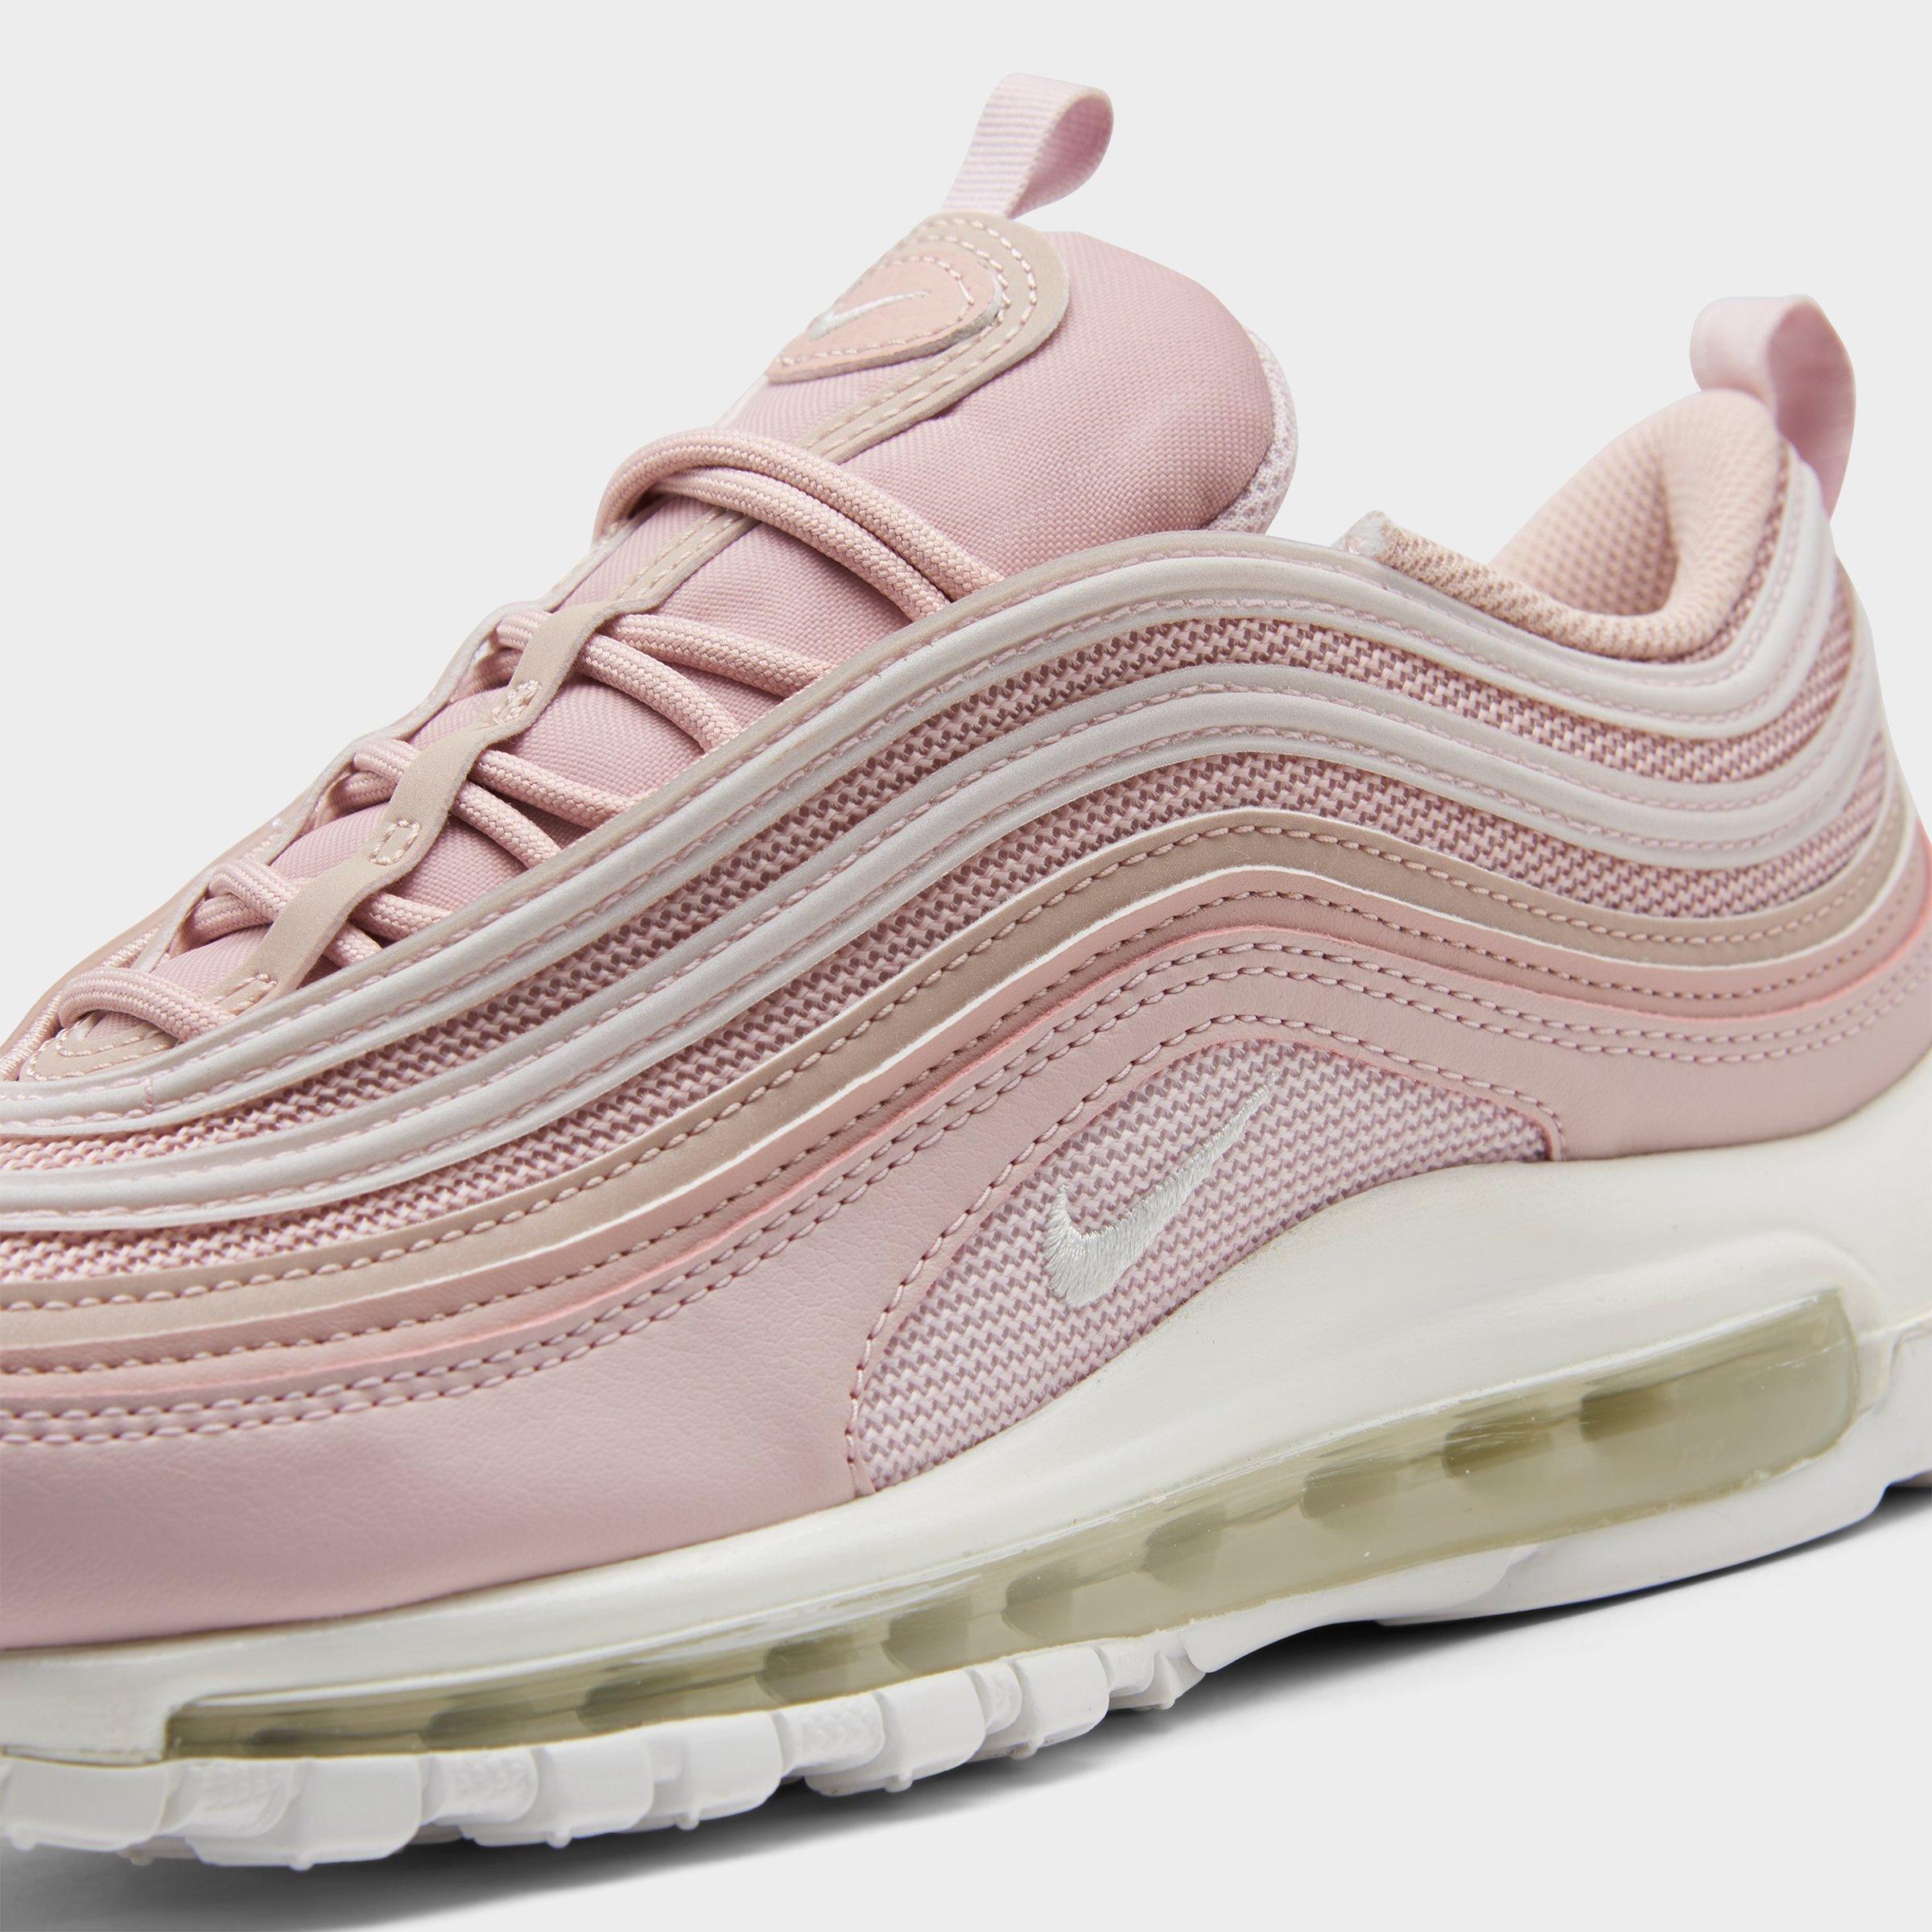 white and pink 97 air max